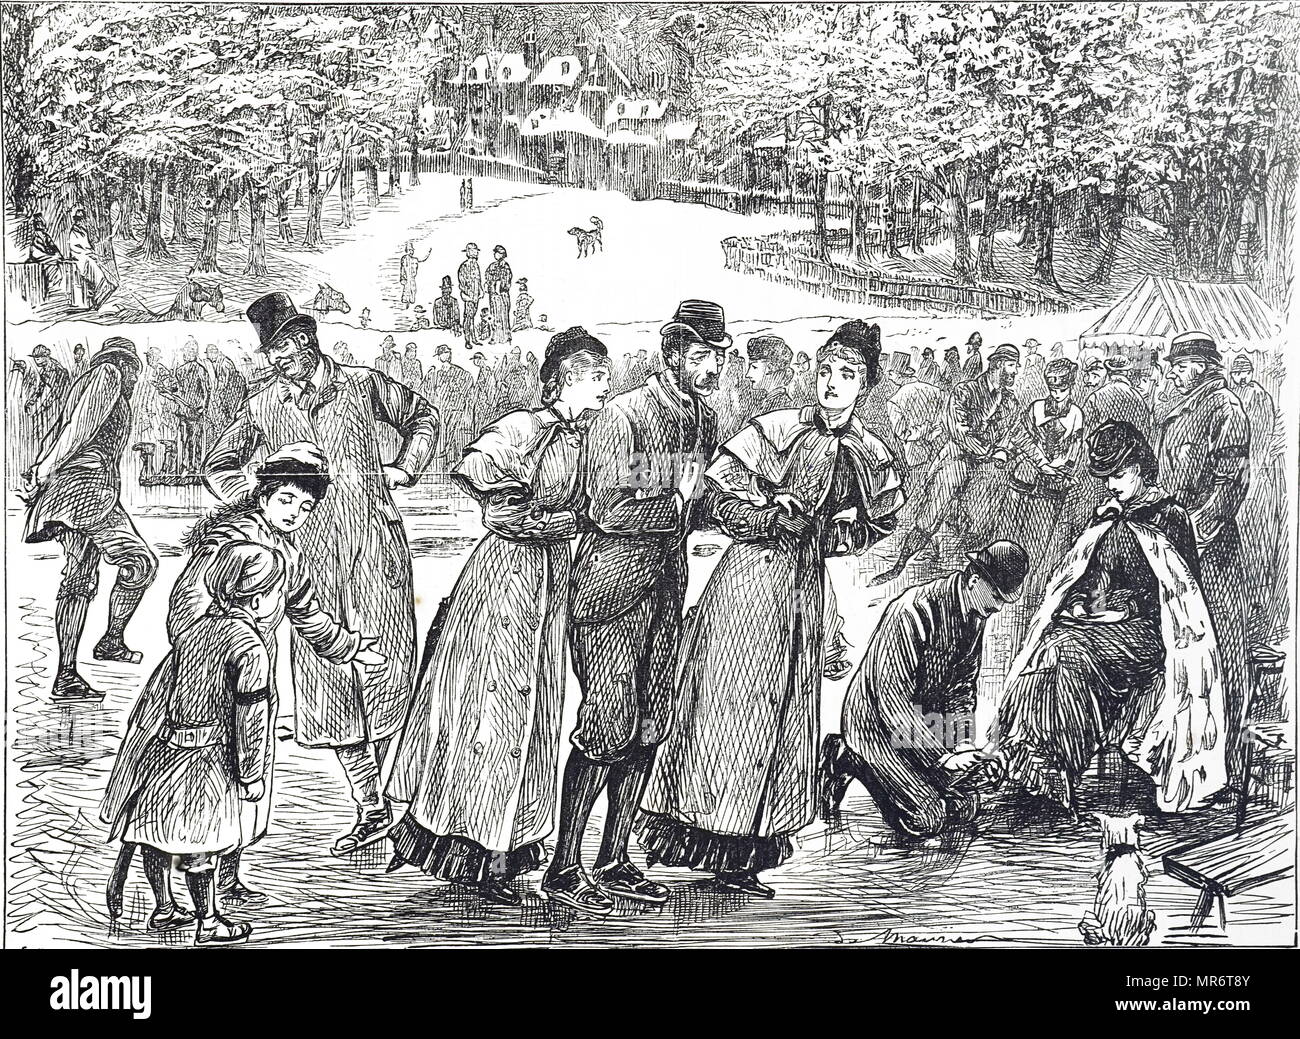 Cartoon depicting skaters skating on a frozen lake. Illustrated by George du Maurier (1834-1896) a Franco-British cartoonist and author. Dated 19th century Stock Photo